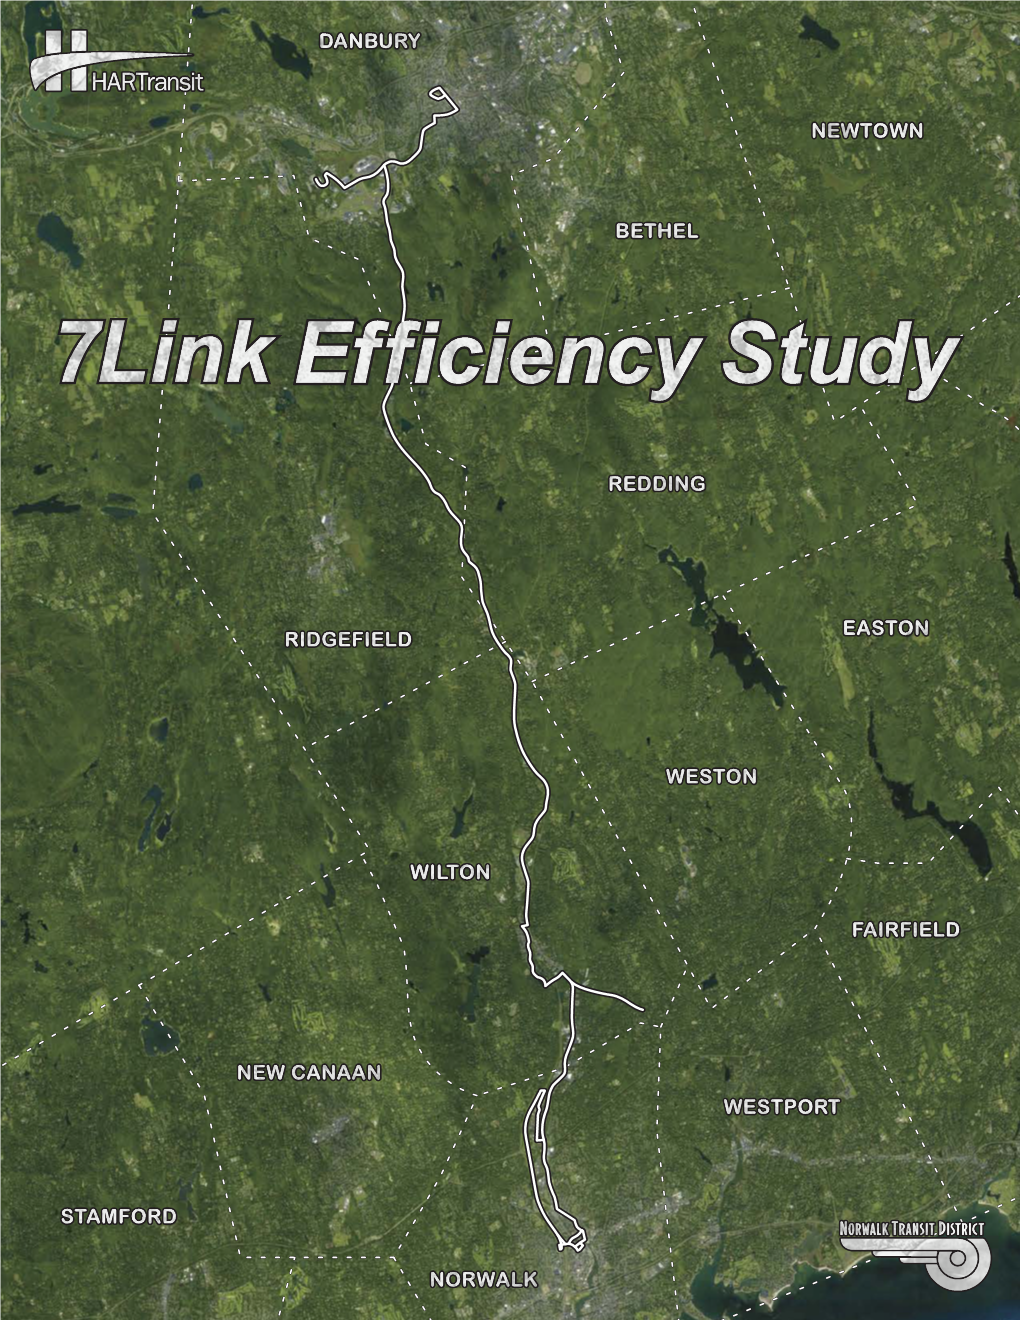 7LINK Bus Route Study